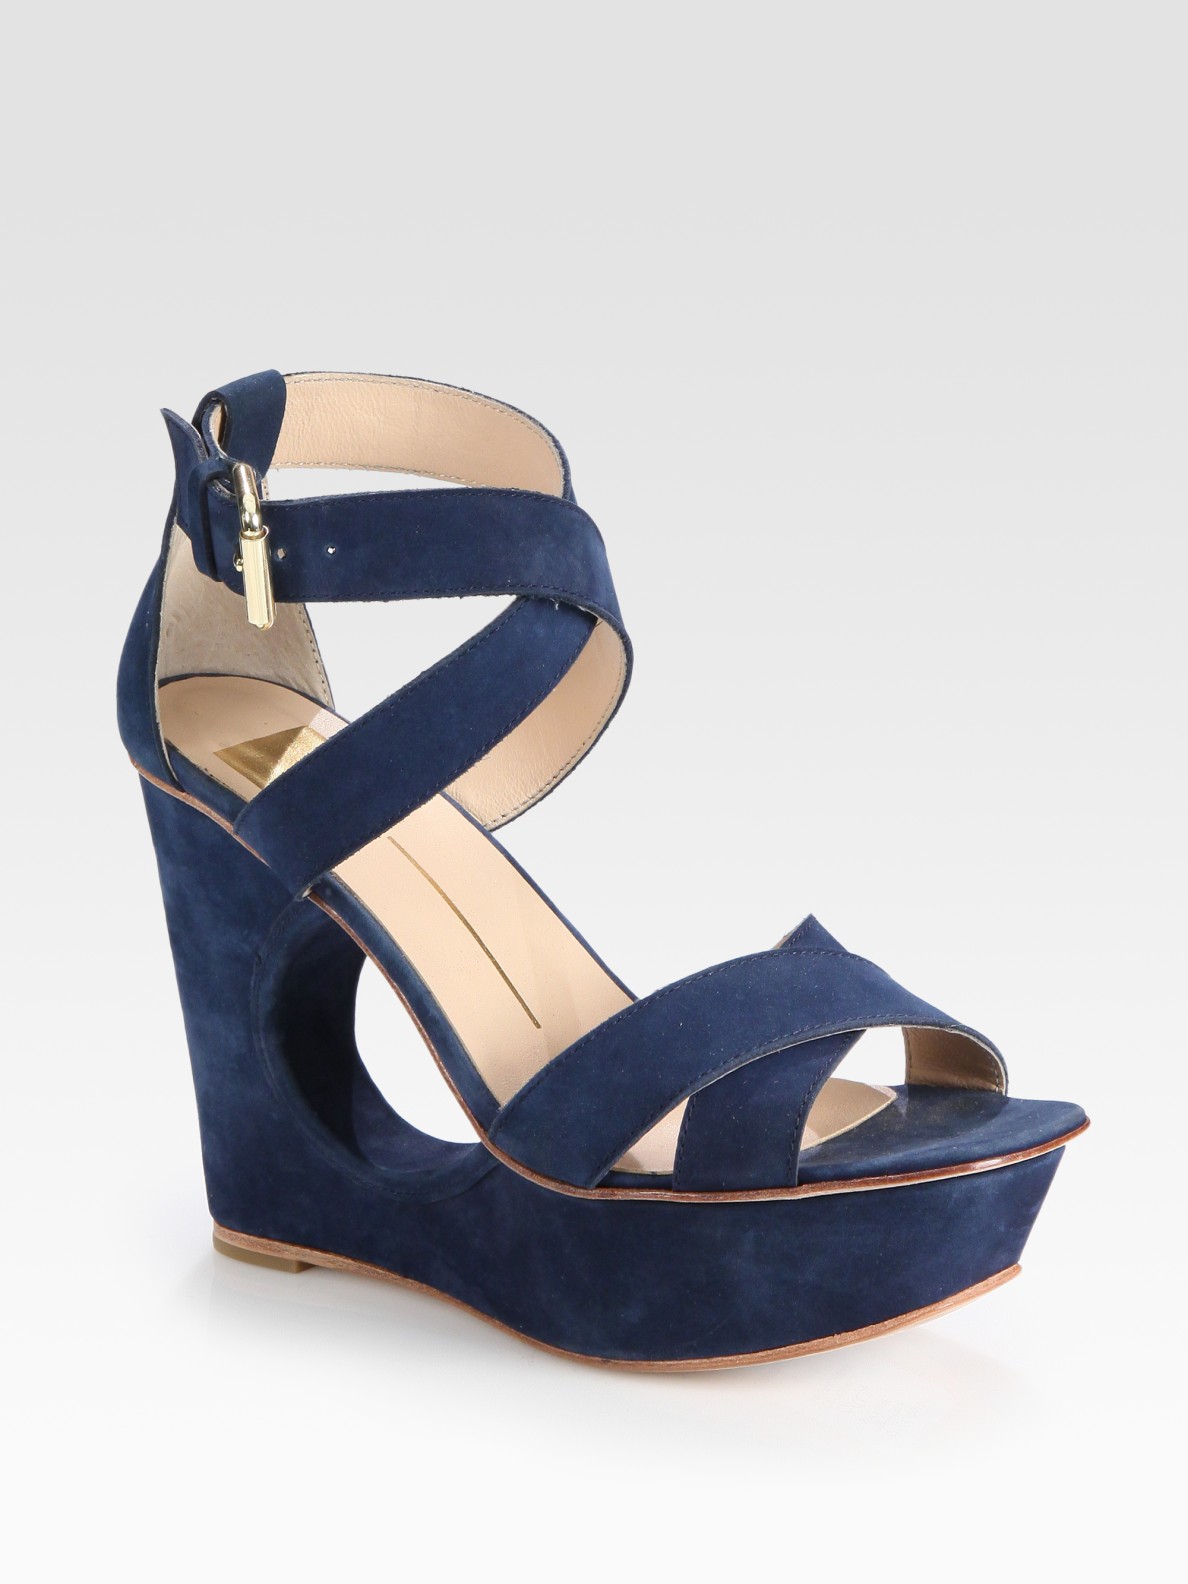 Dolce Vita Suede Cutout Wedge Sandals 